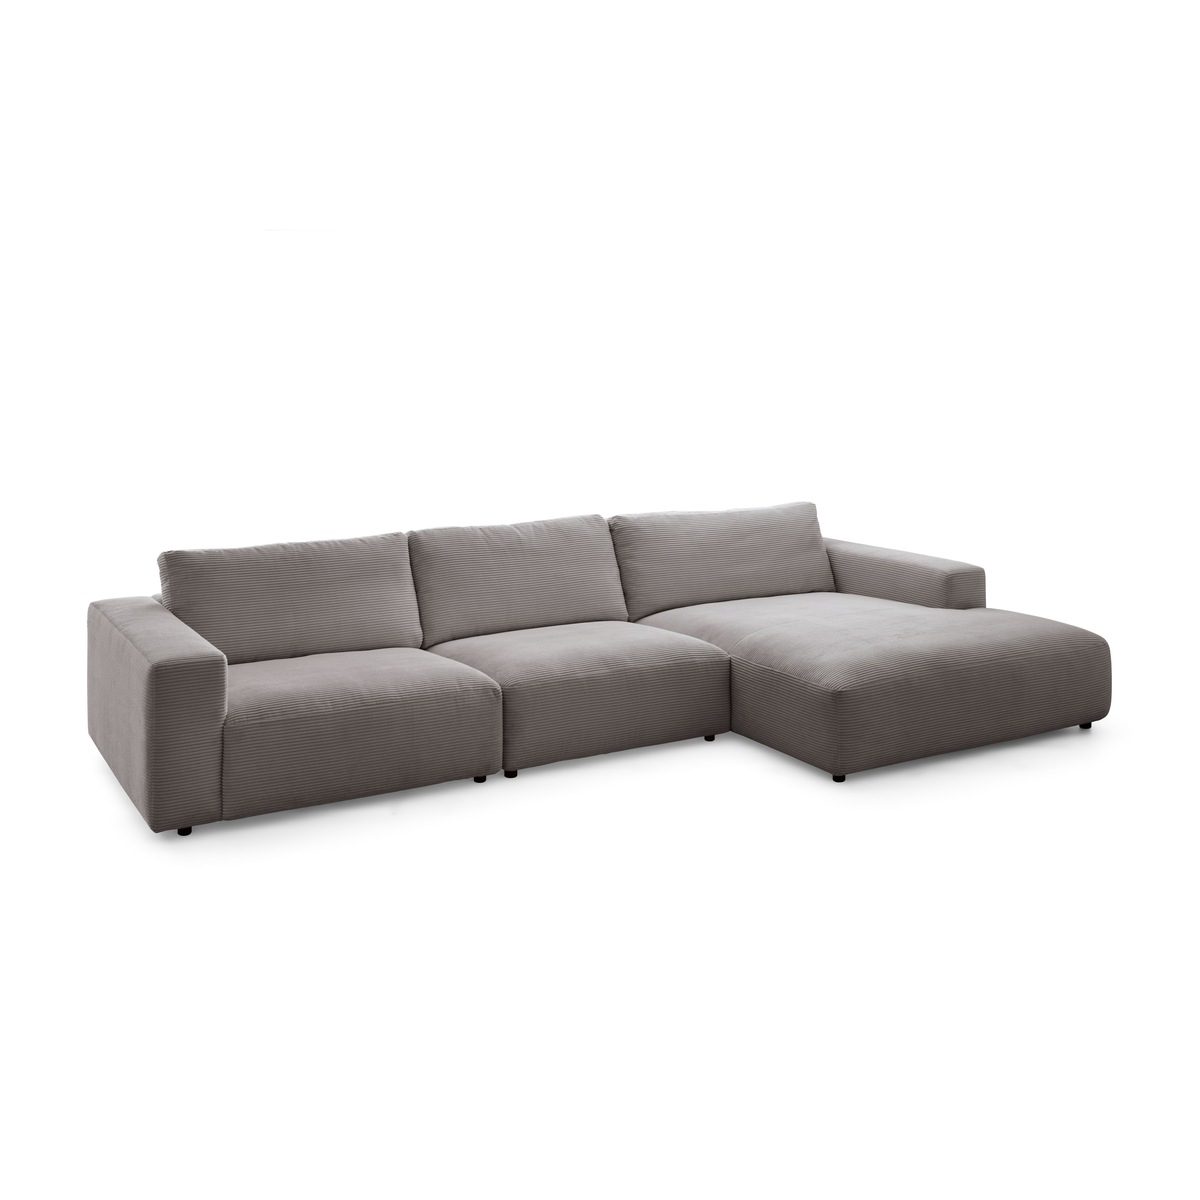 Musterring by M Sofa Lucia branded 3,5 Cord Sitzer Gallery